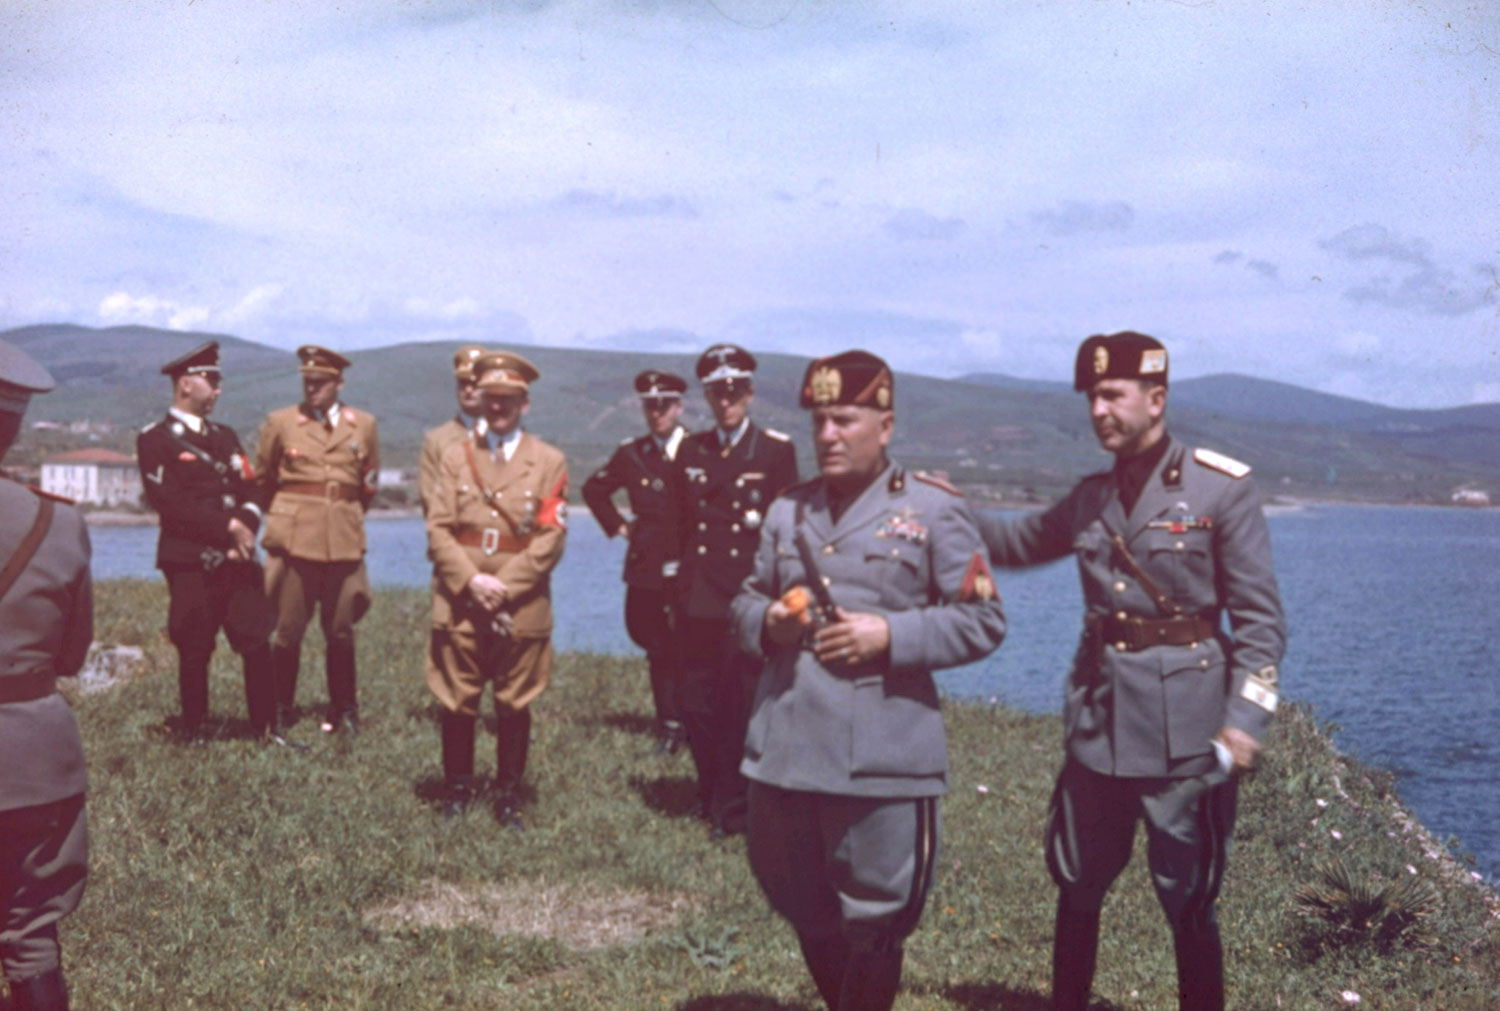 High-ranking Nazi and Italian Fascist officials, including Hitler and Mussolini, at Santa Marinella, Lazio, during Hitler's 1938 state visit to Italy.